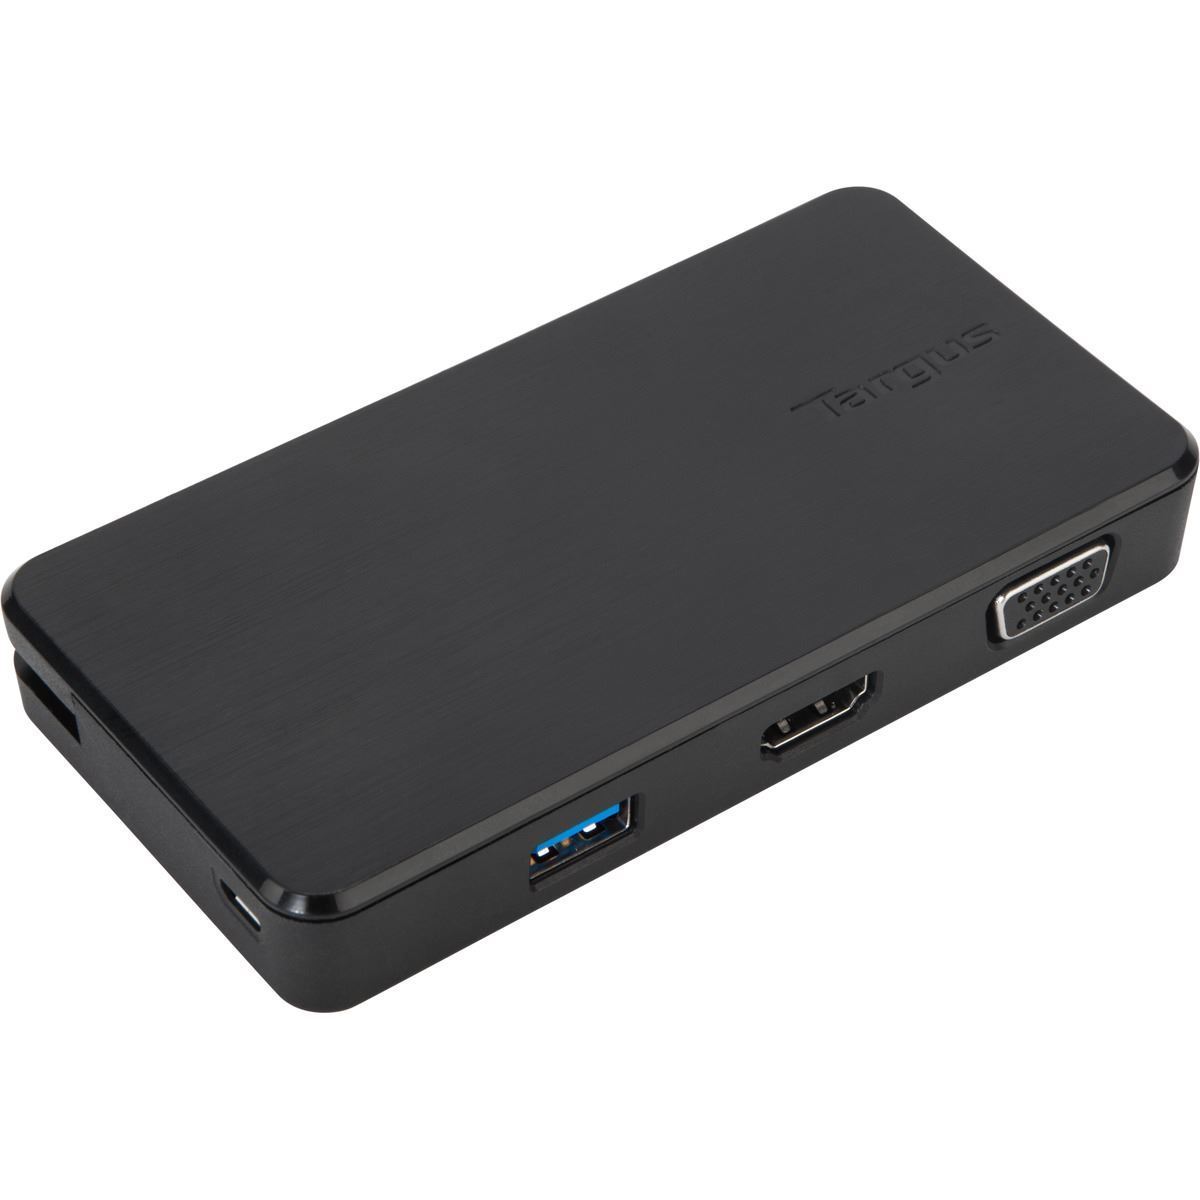 Targus USB 3.0 & USB-C Dual Travel Dock Connects 2 monitors, 1x HDMI 1x VGA, Supports Projectors and HDTVs, PCs, Macs, and Android Devices - image1